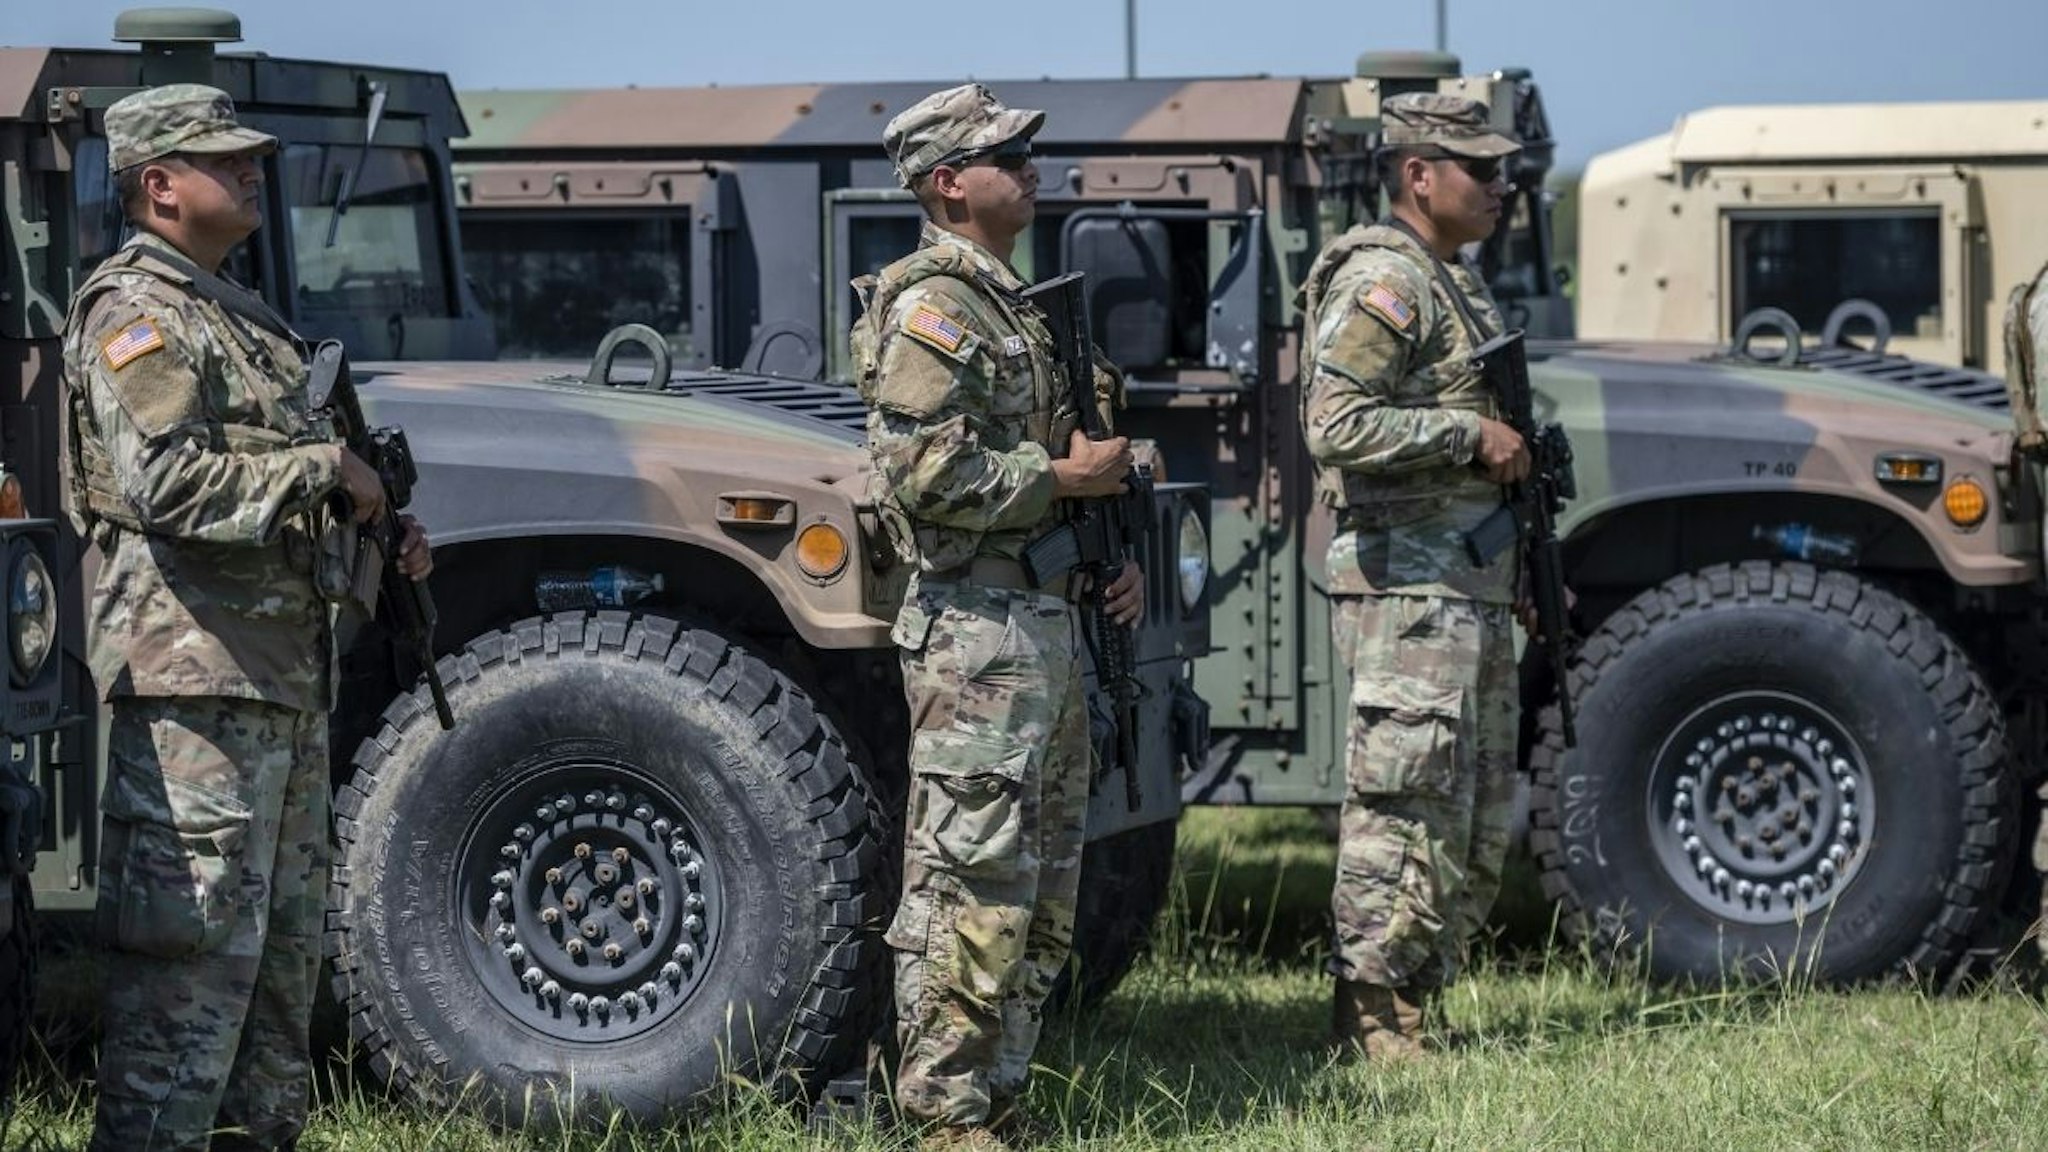 Members of the Texas National Guard during a news conference with Greg Abbott, governor of Texas, not pictured, in Mission, Texas, U.S., on Wednesday, Oct. 6, 2021.